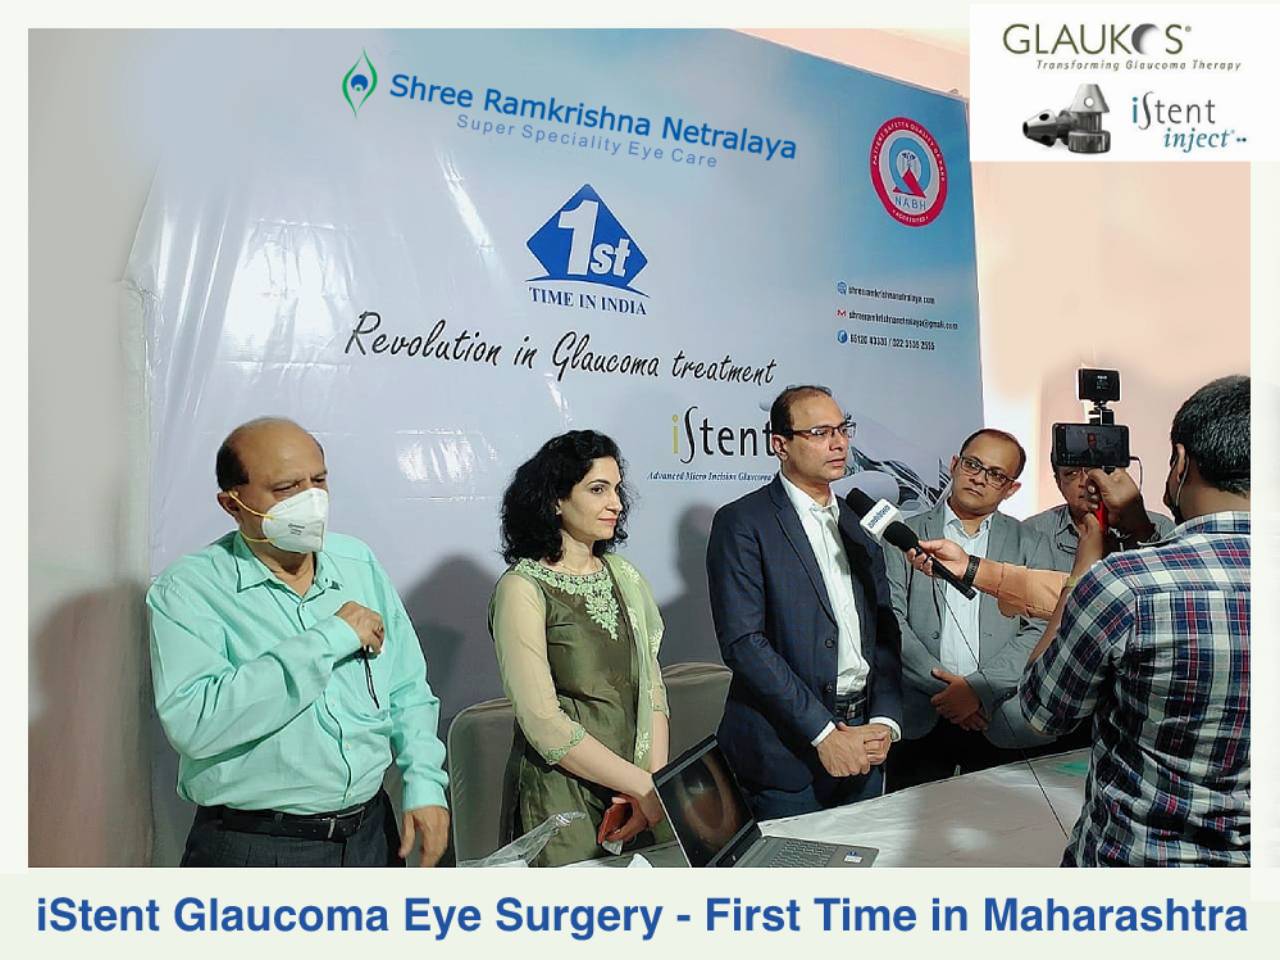 istent glaucoma eye surgery event